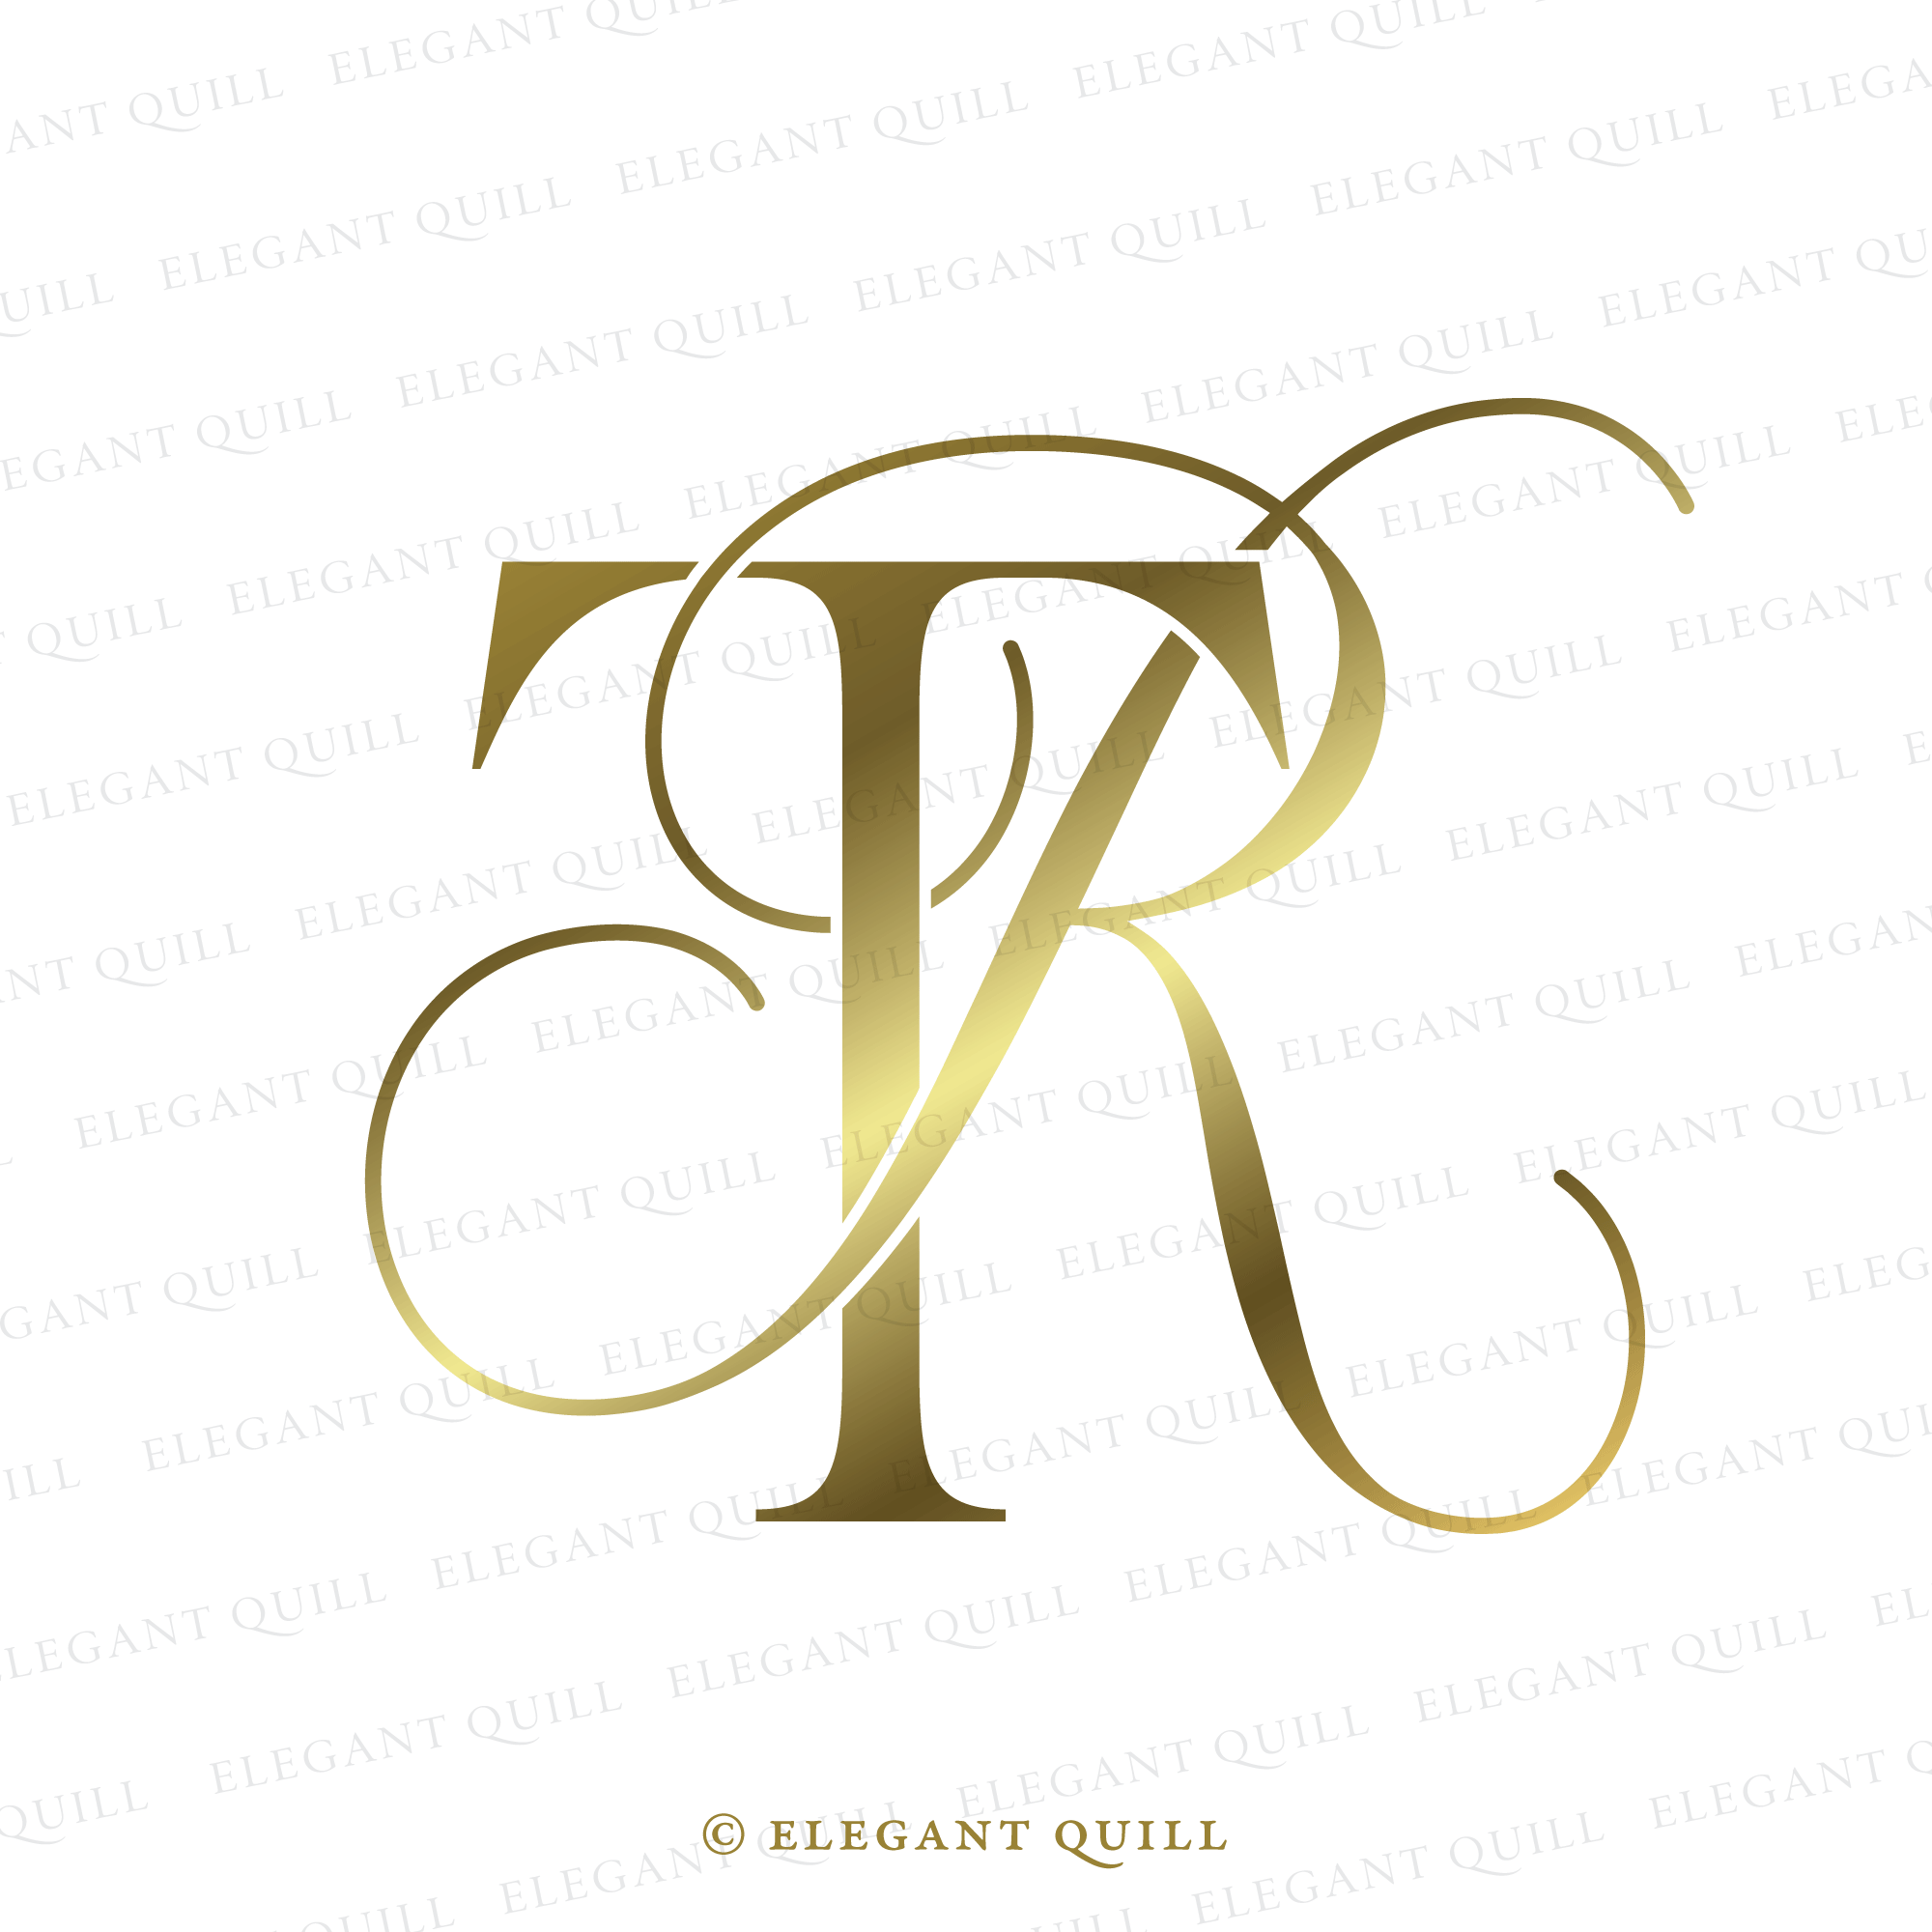 Golden Rs Initial Vector & Photo (Free Trial) | Bigstock